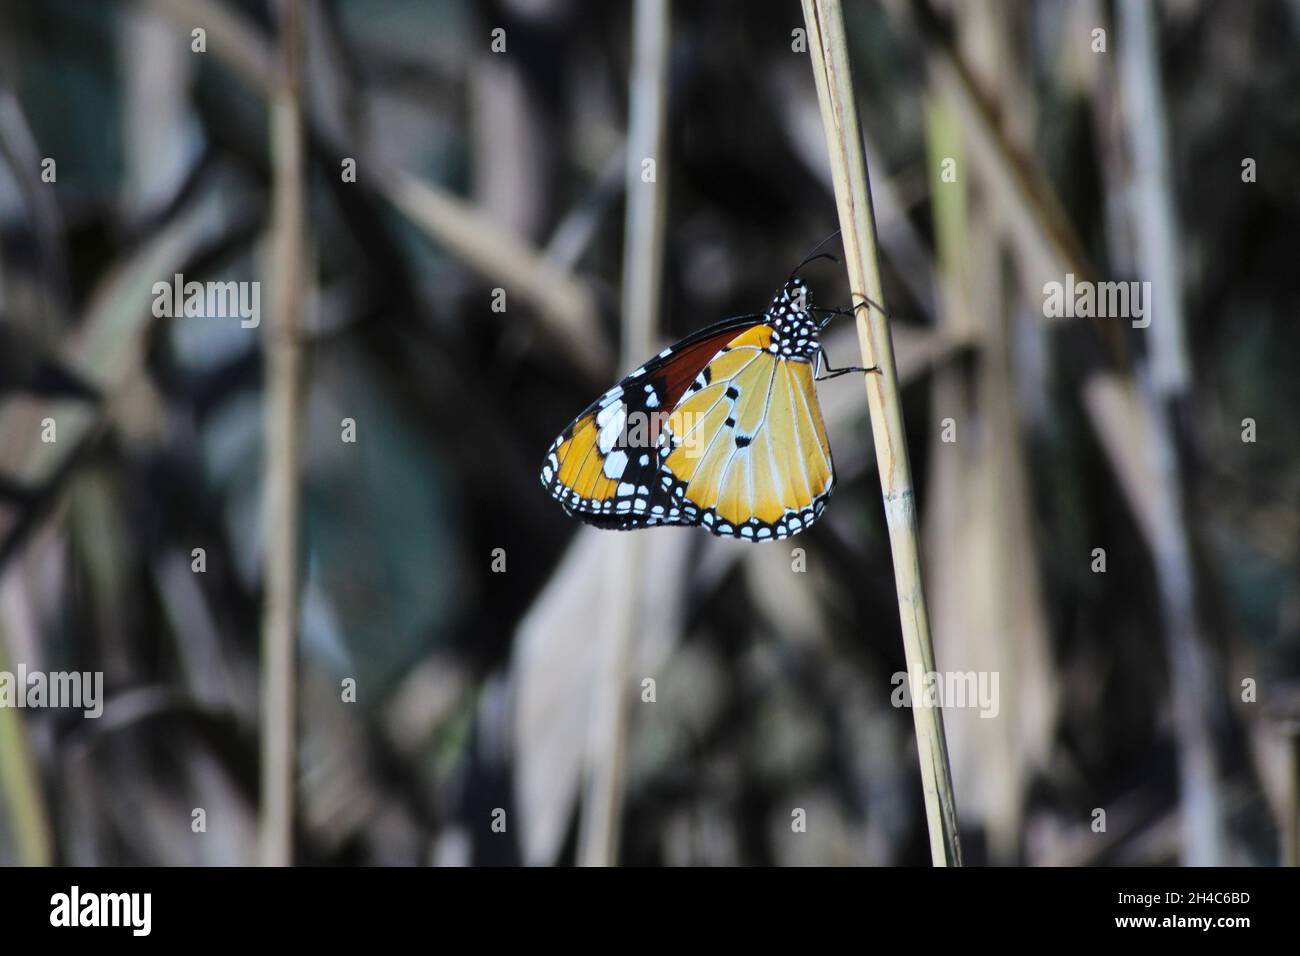 Plain Tiger butterfly side view, in wetlands, Spain Stock Photo